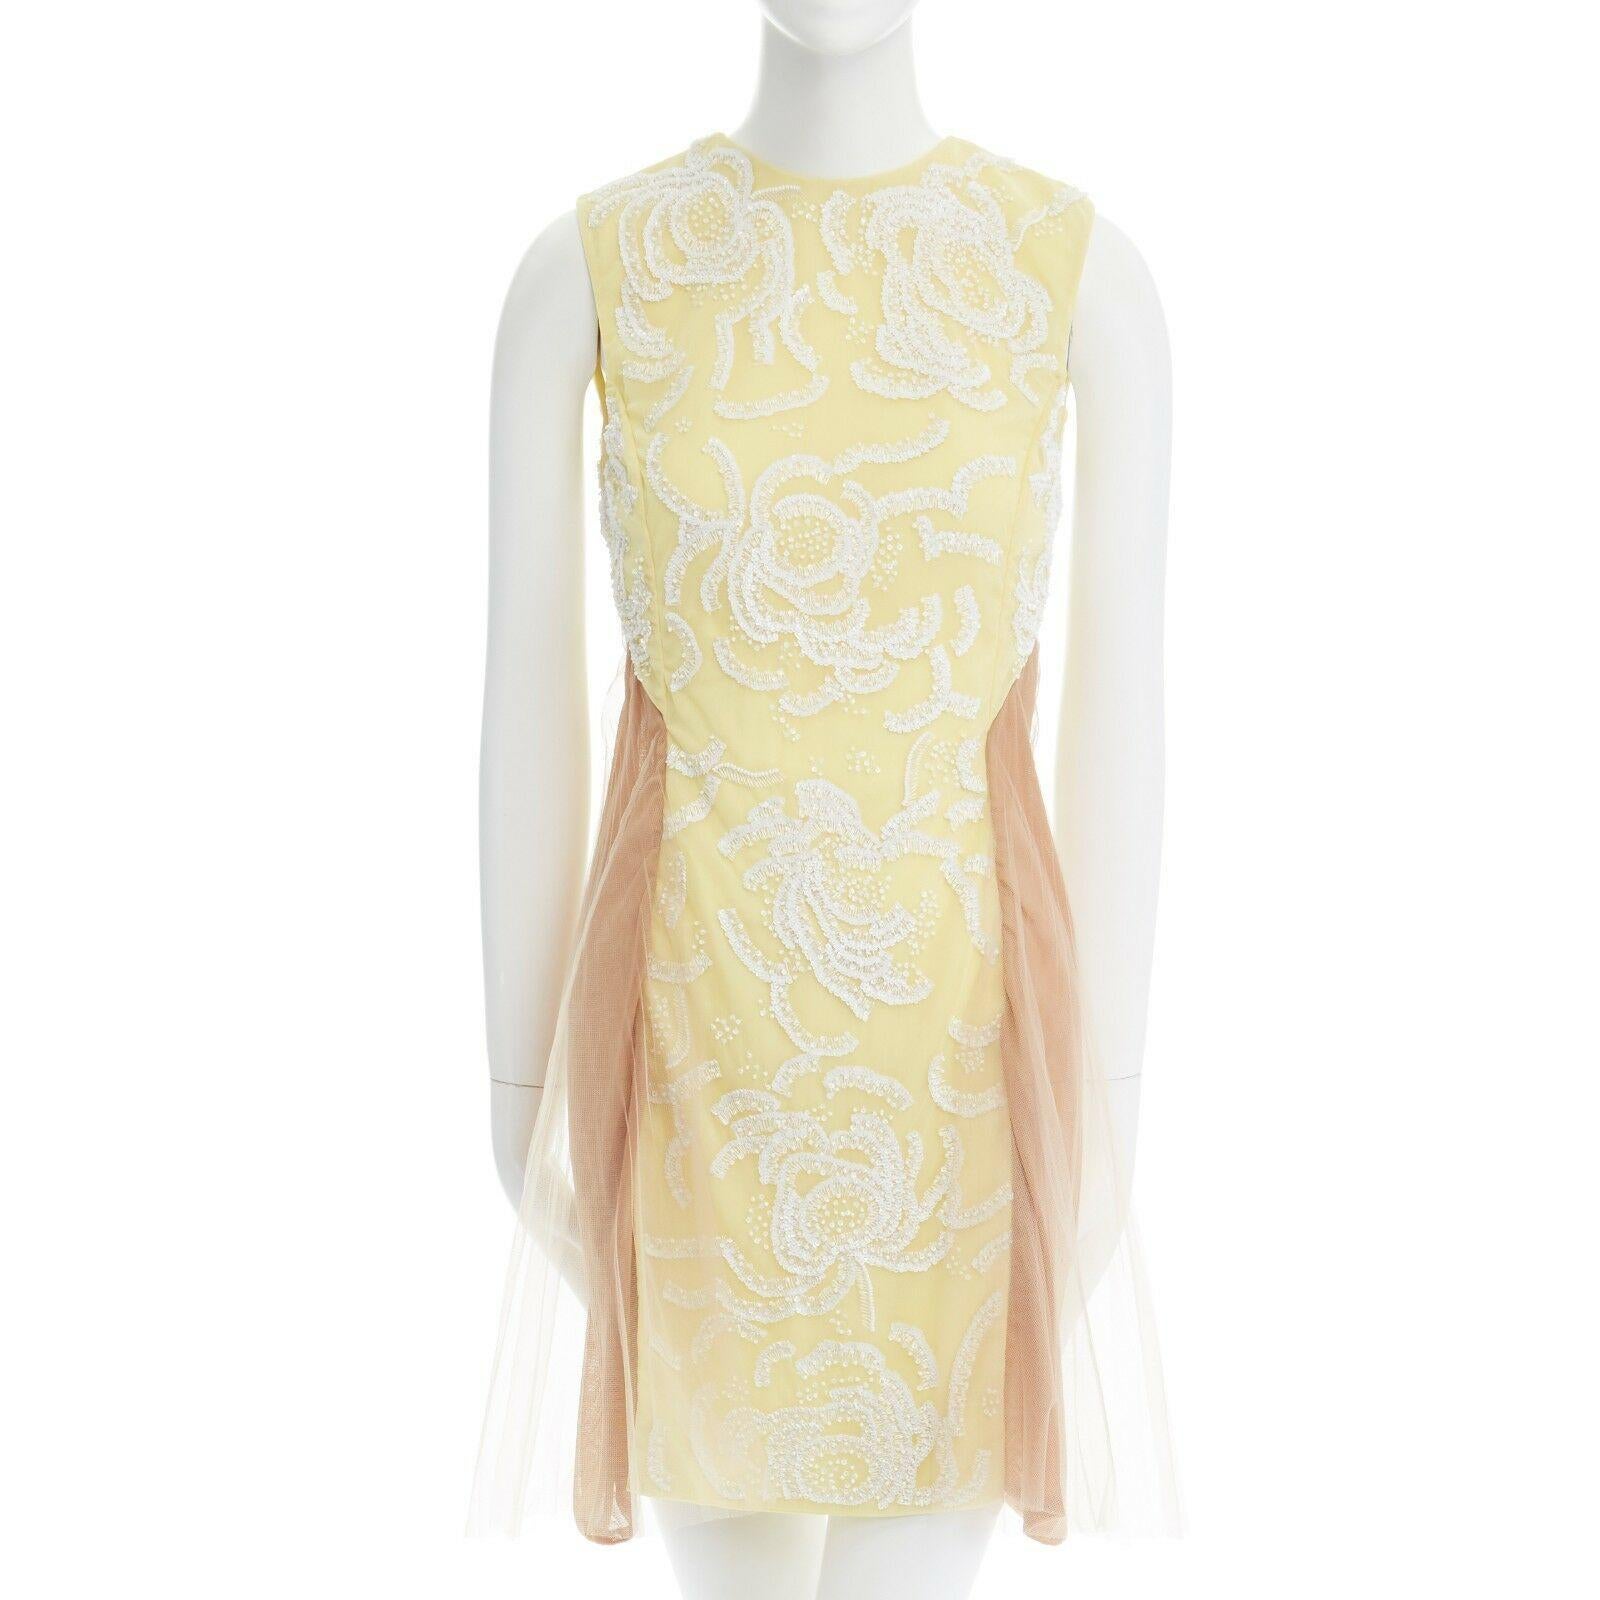 runway CHRISTOPHER KANE SS10 yellow sequins lace nude tulle insert dress UK6 XS

CHRISTOPHER KANE
FROM THE SPRING SUMMER 2010 RUNWAY
AS SEEN ON: PATRICIA VAN DER VLIET FOR VOGUE, FRIEDA PINTO
Yellow and nude. White sequins embroidery to replicate